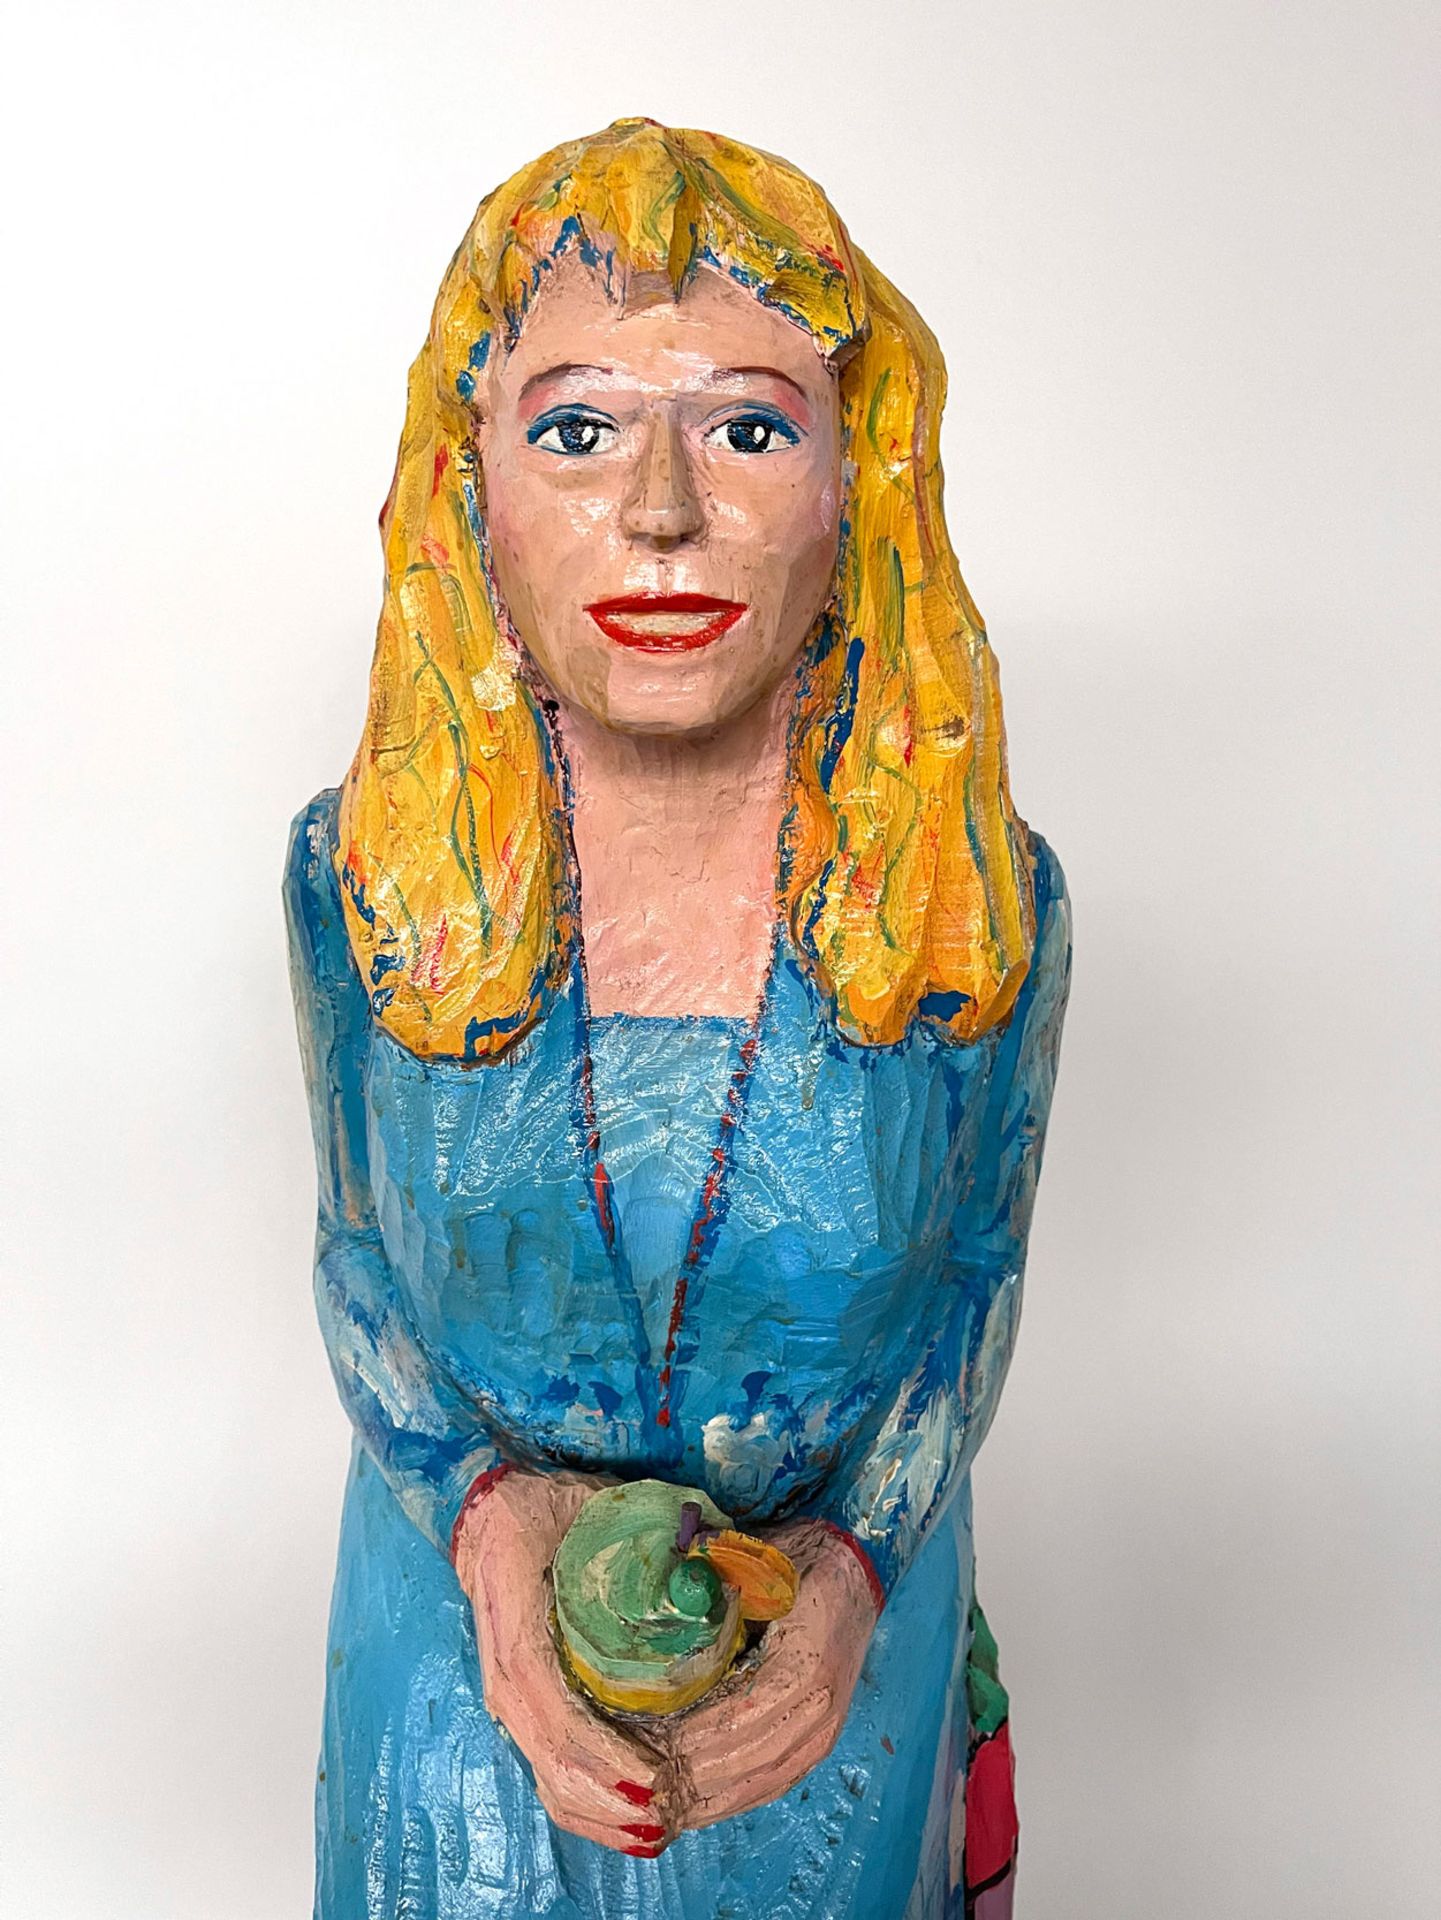 Wooden Statue Depicting a Woman on a Chair with Cocktail - Image 10 of 10